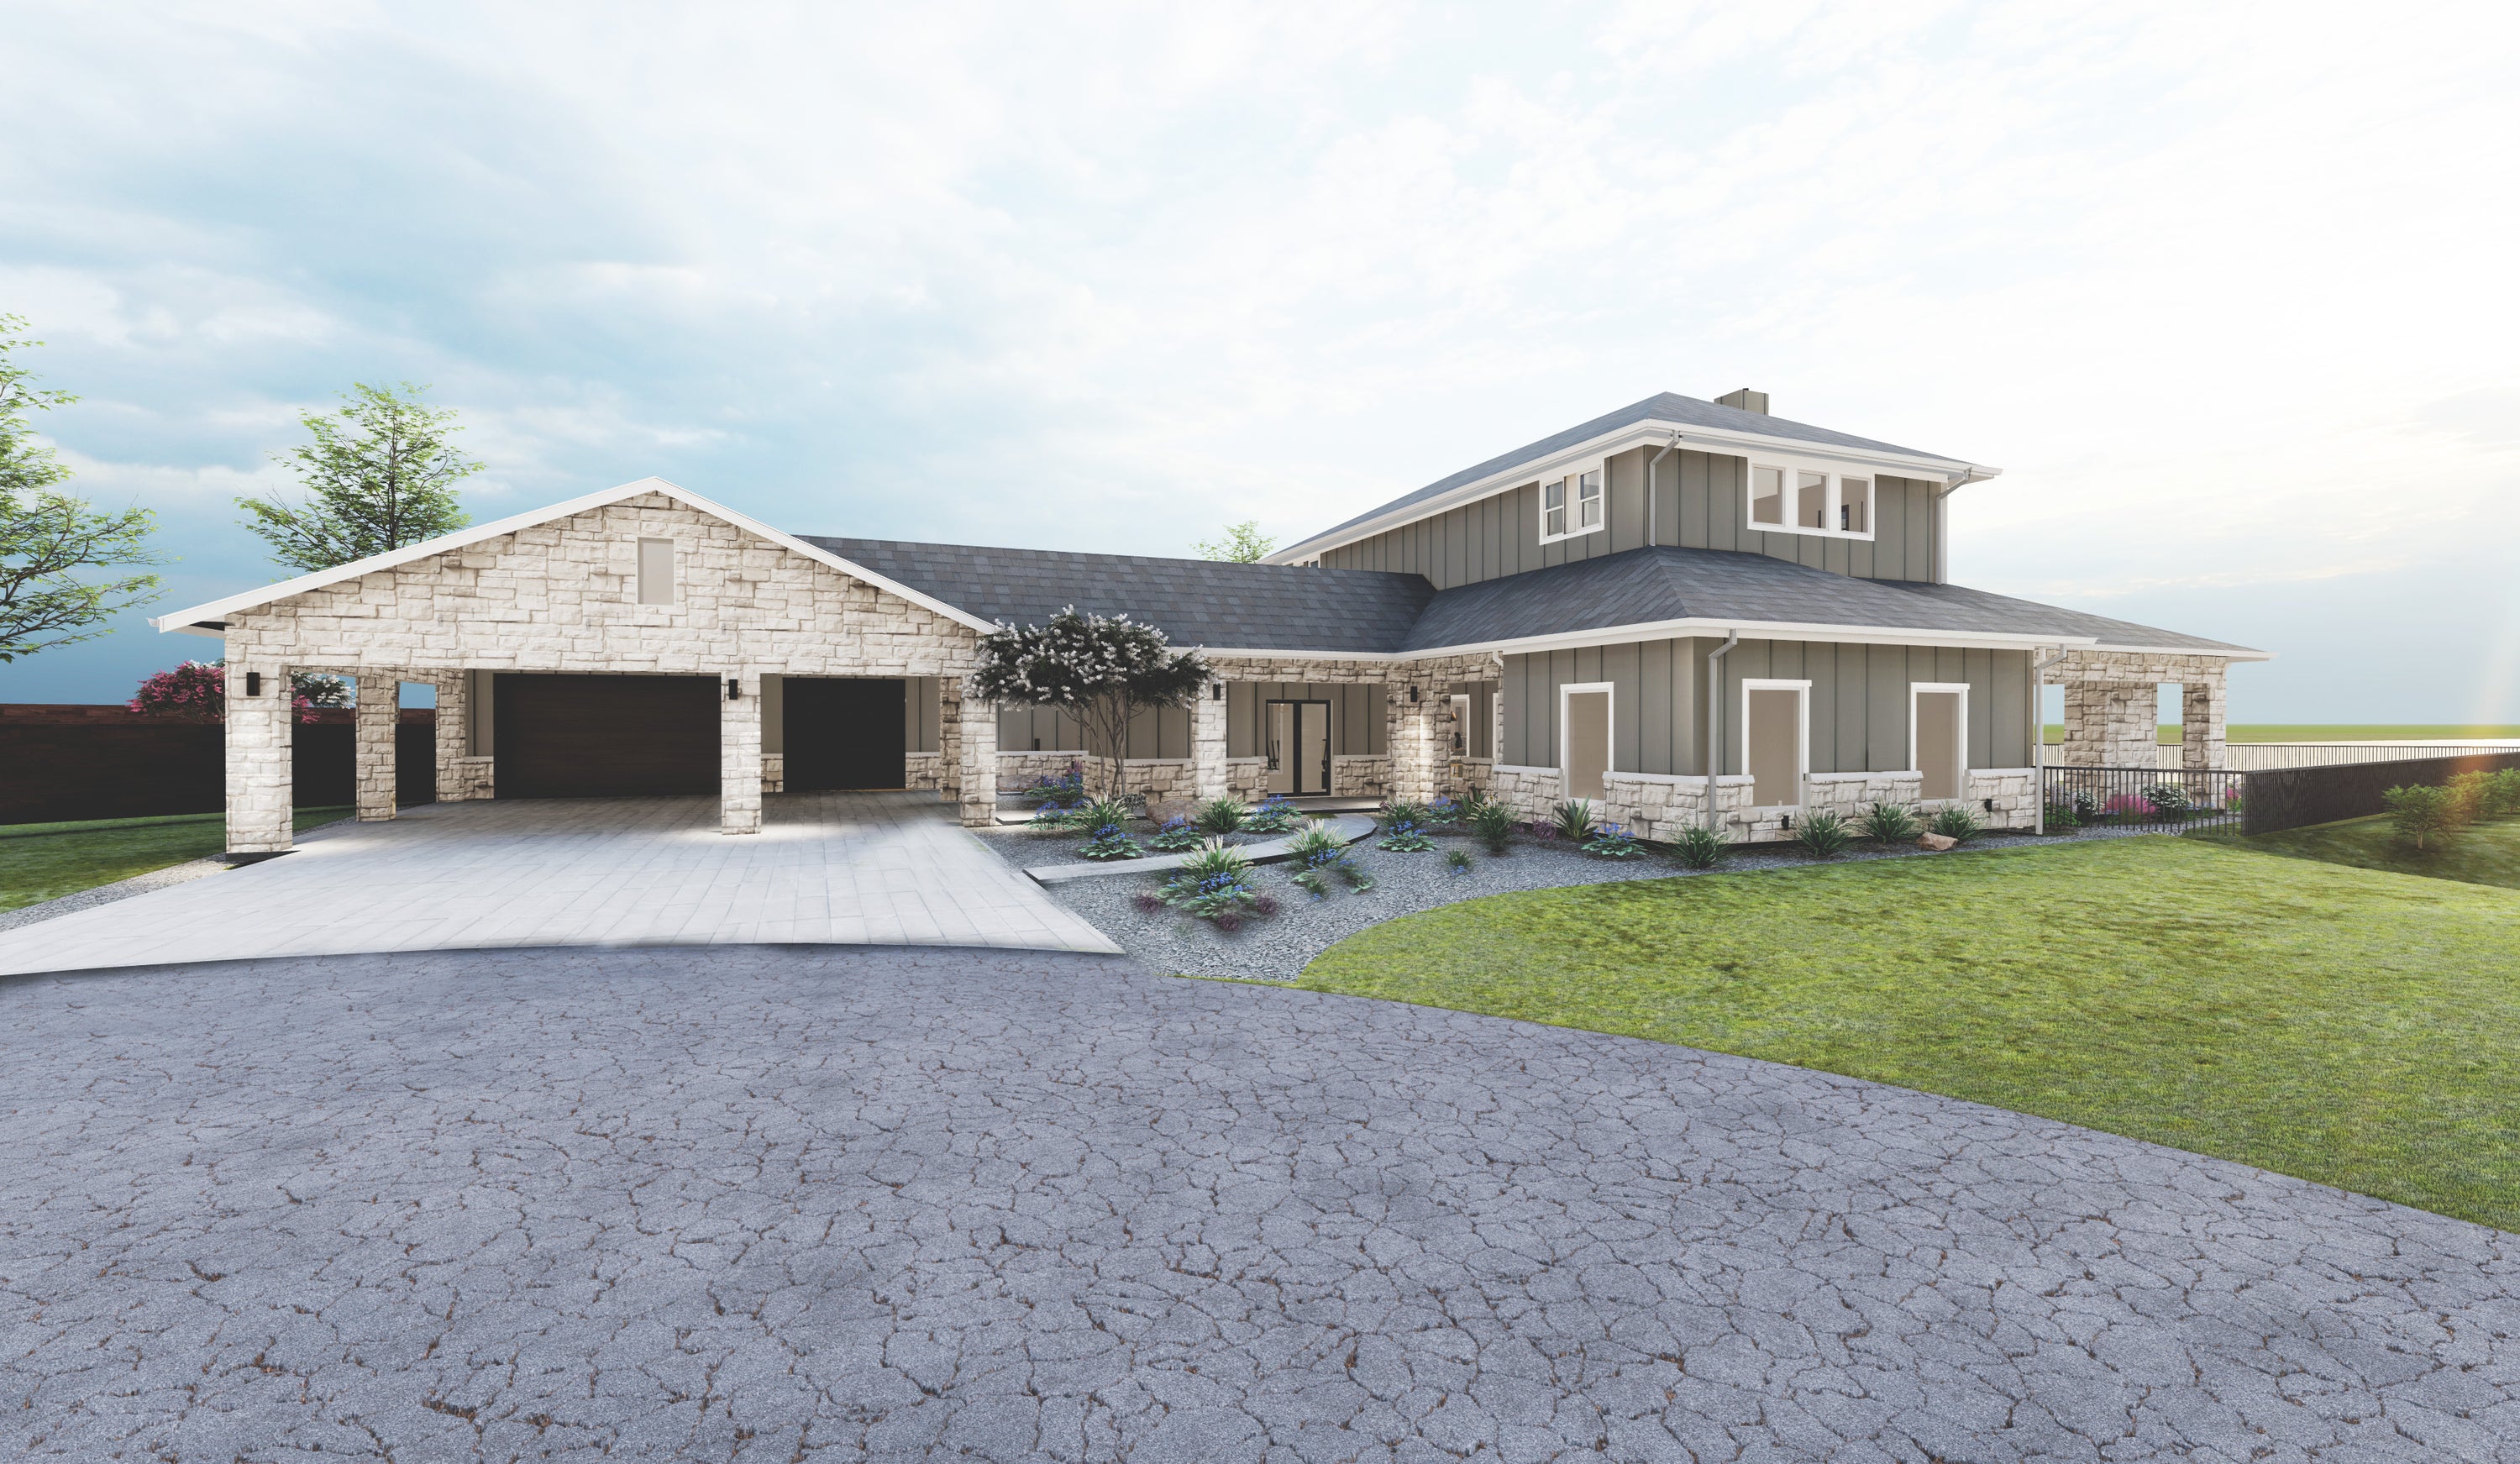 rendering of large transitional home, white limestone and vertical siding.